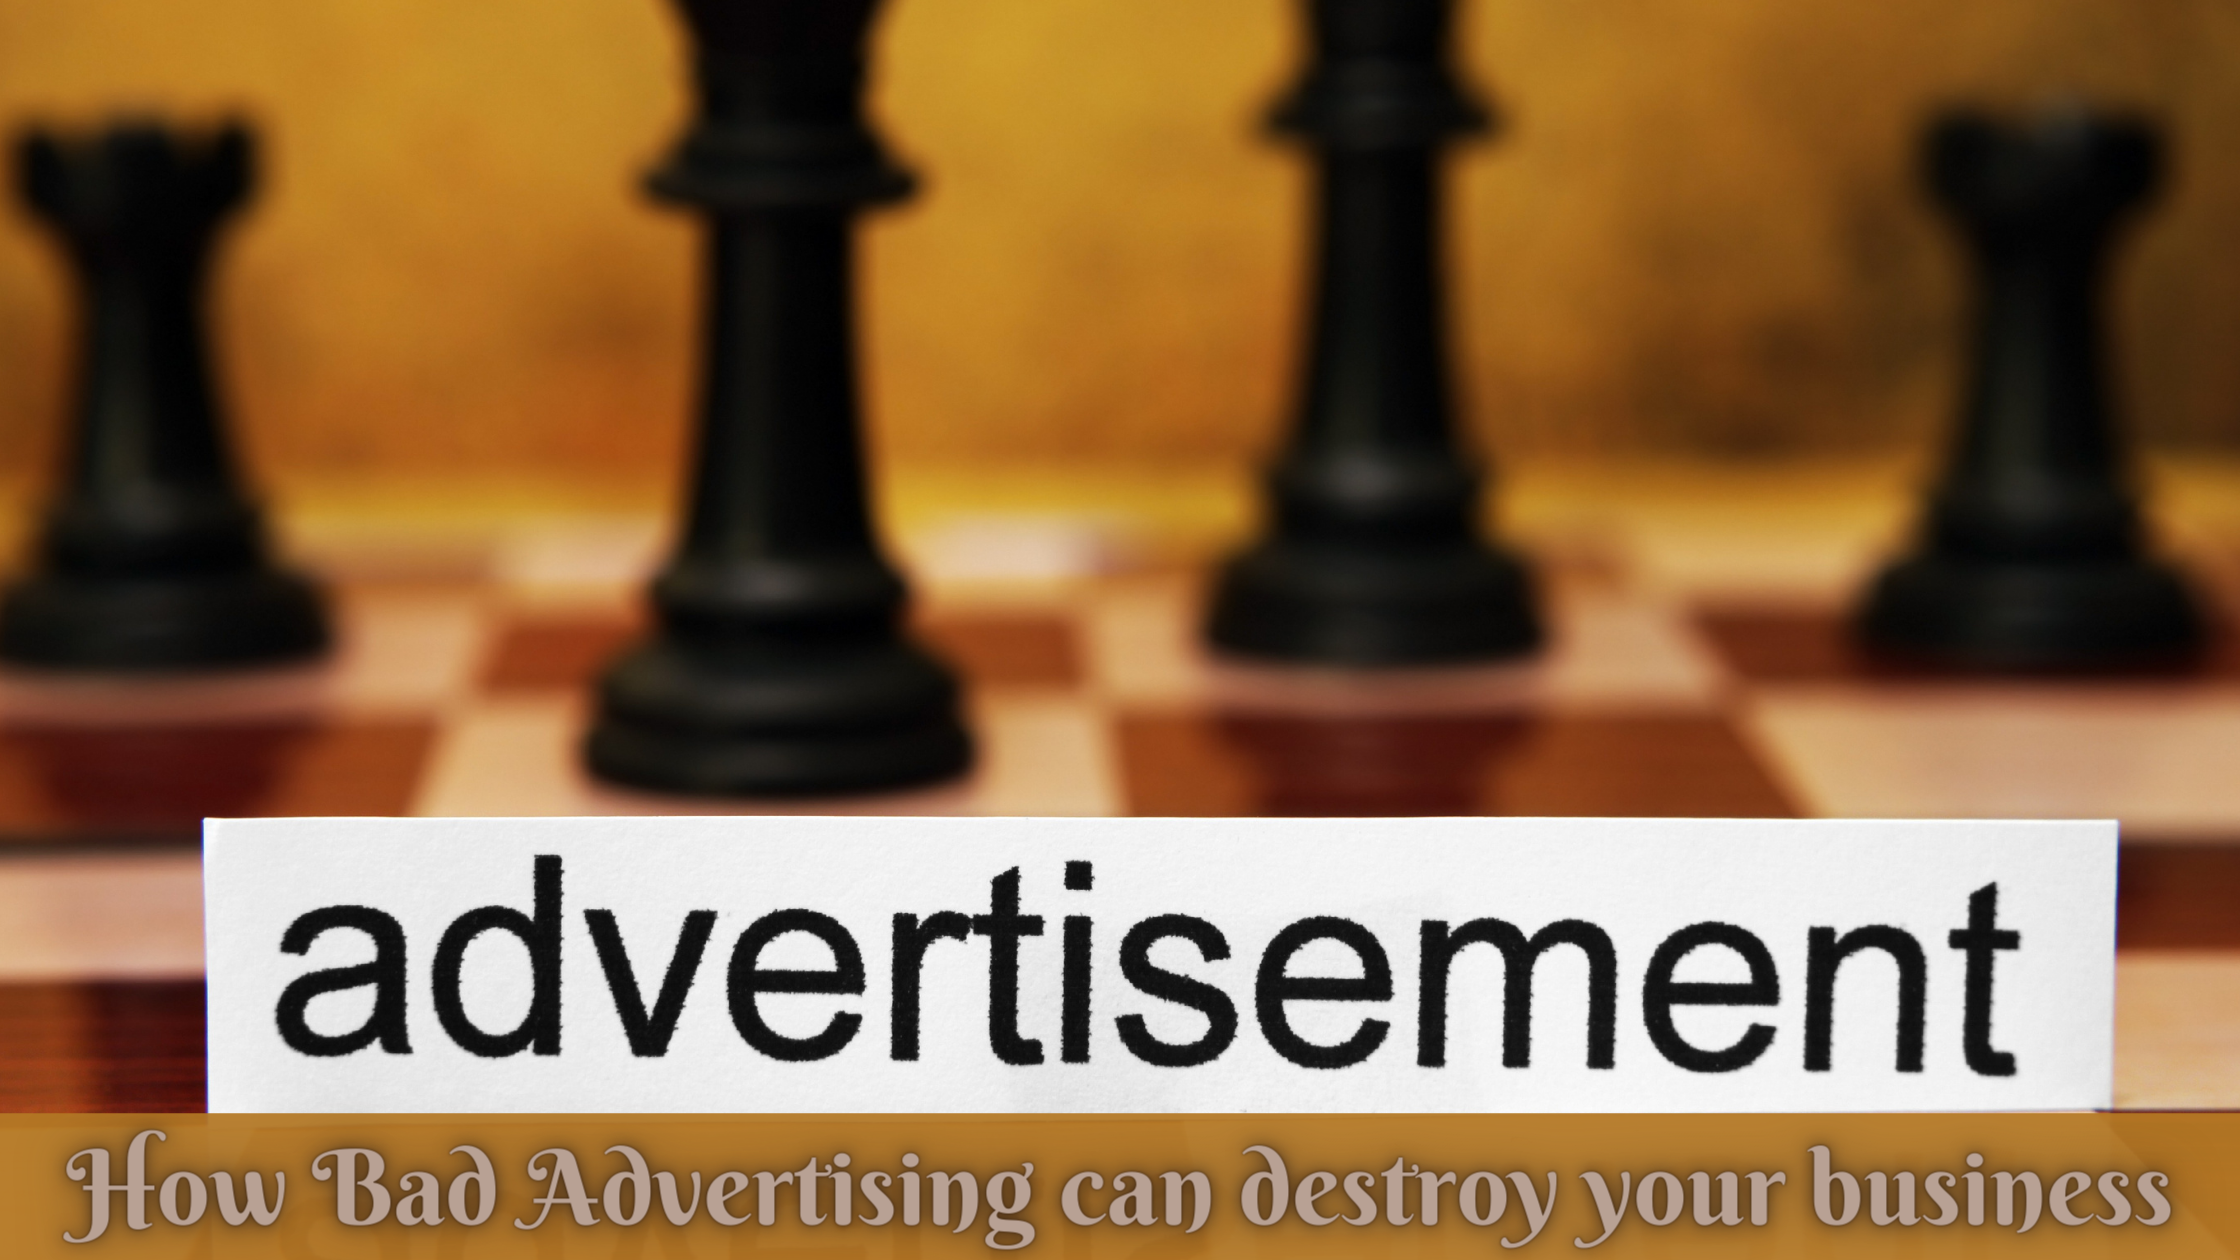 How Bad Advertising can destroy your business